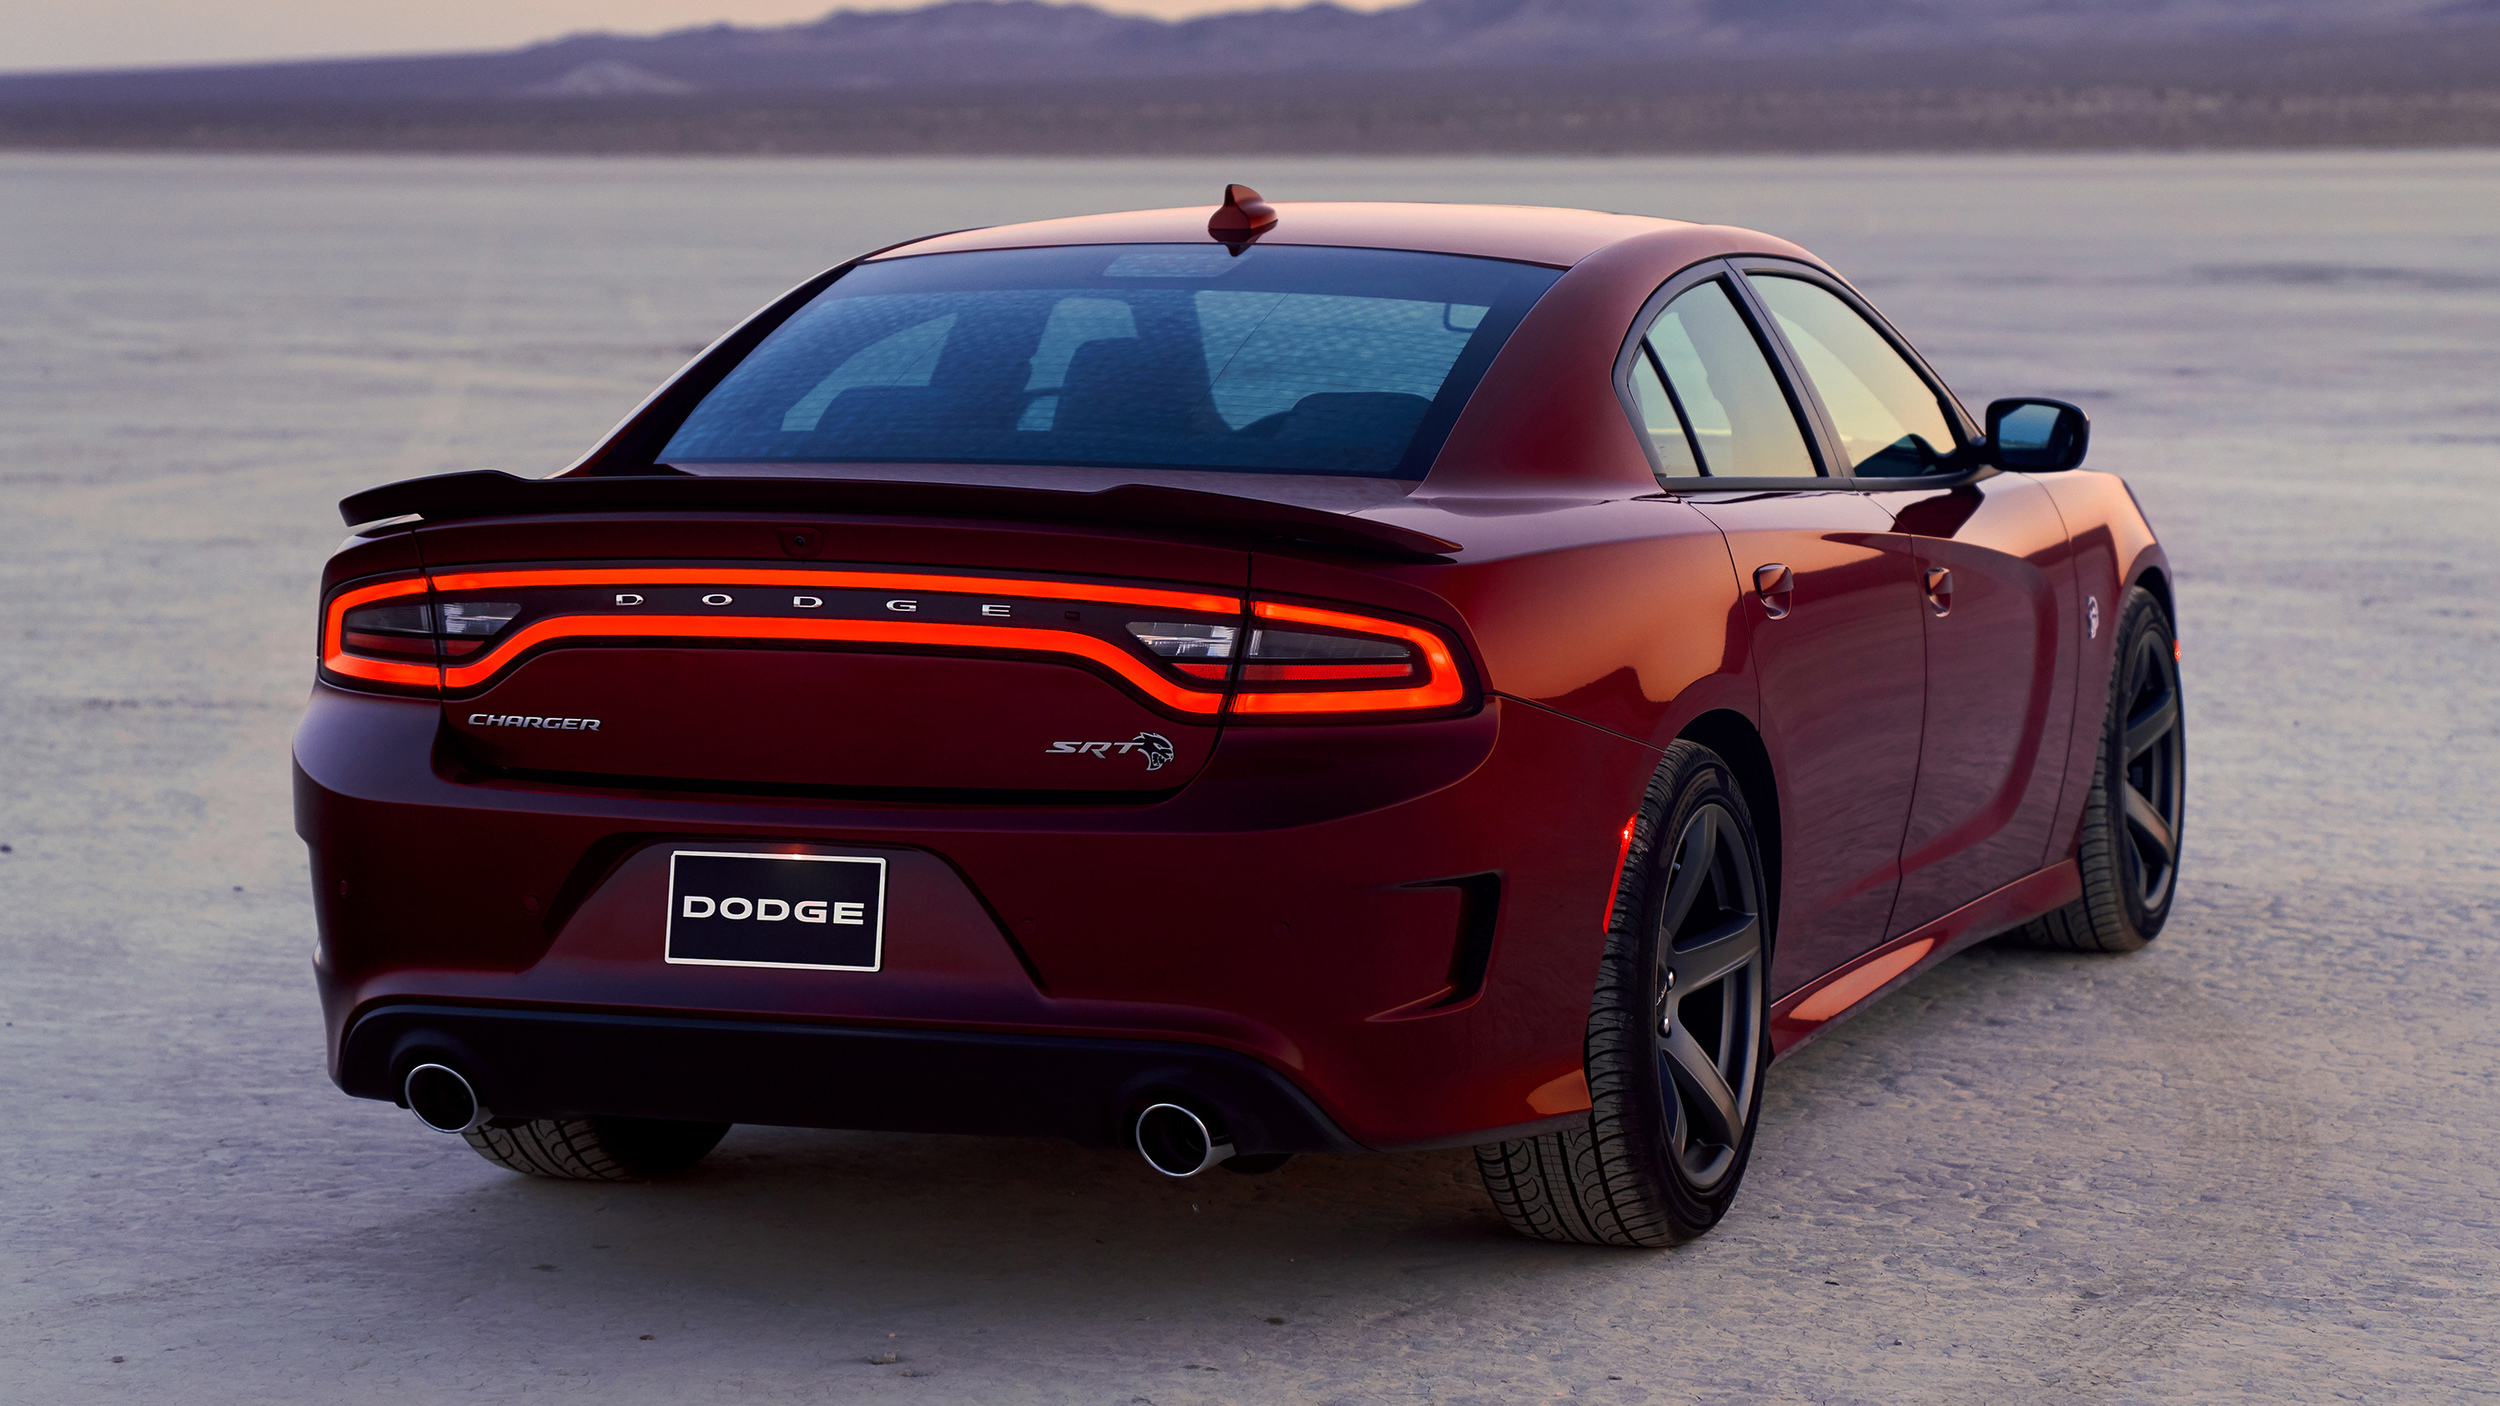 charger8-1.jpg